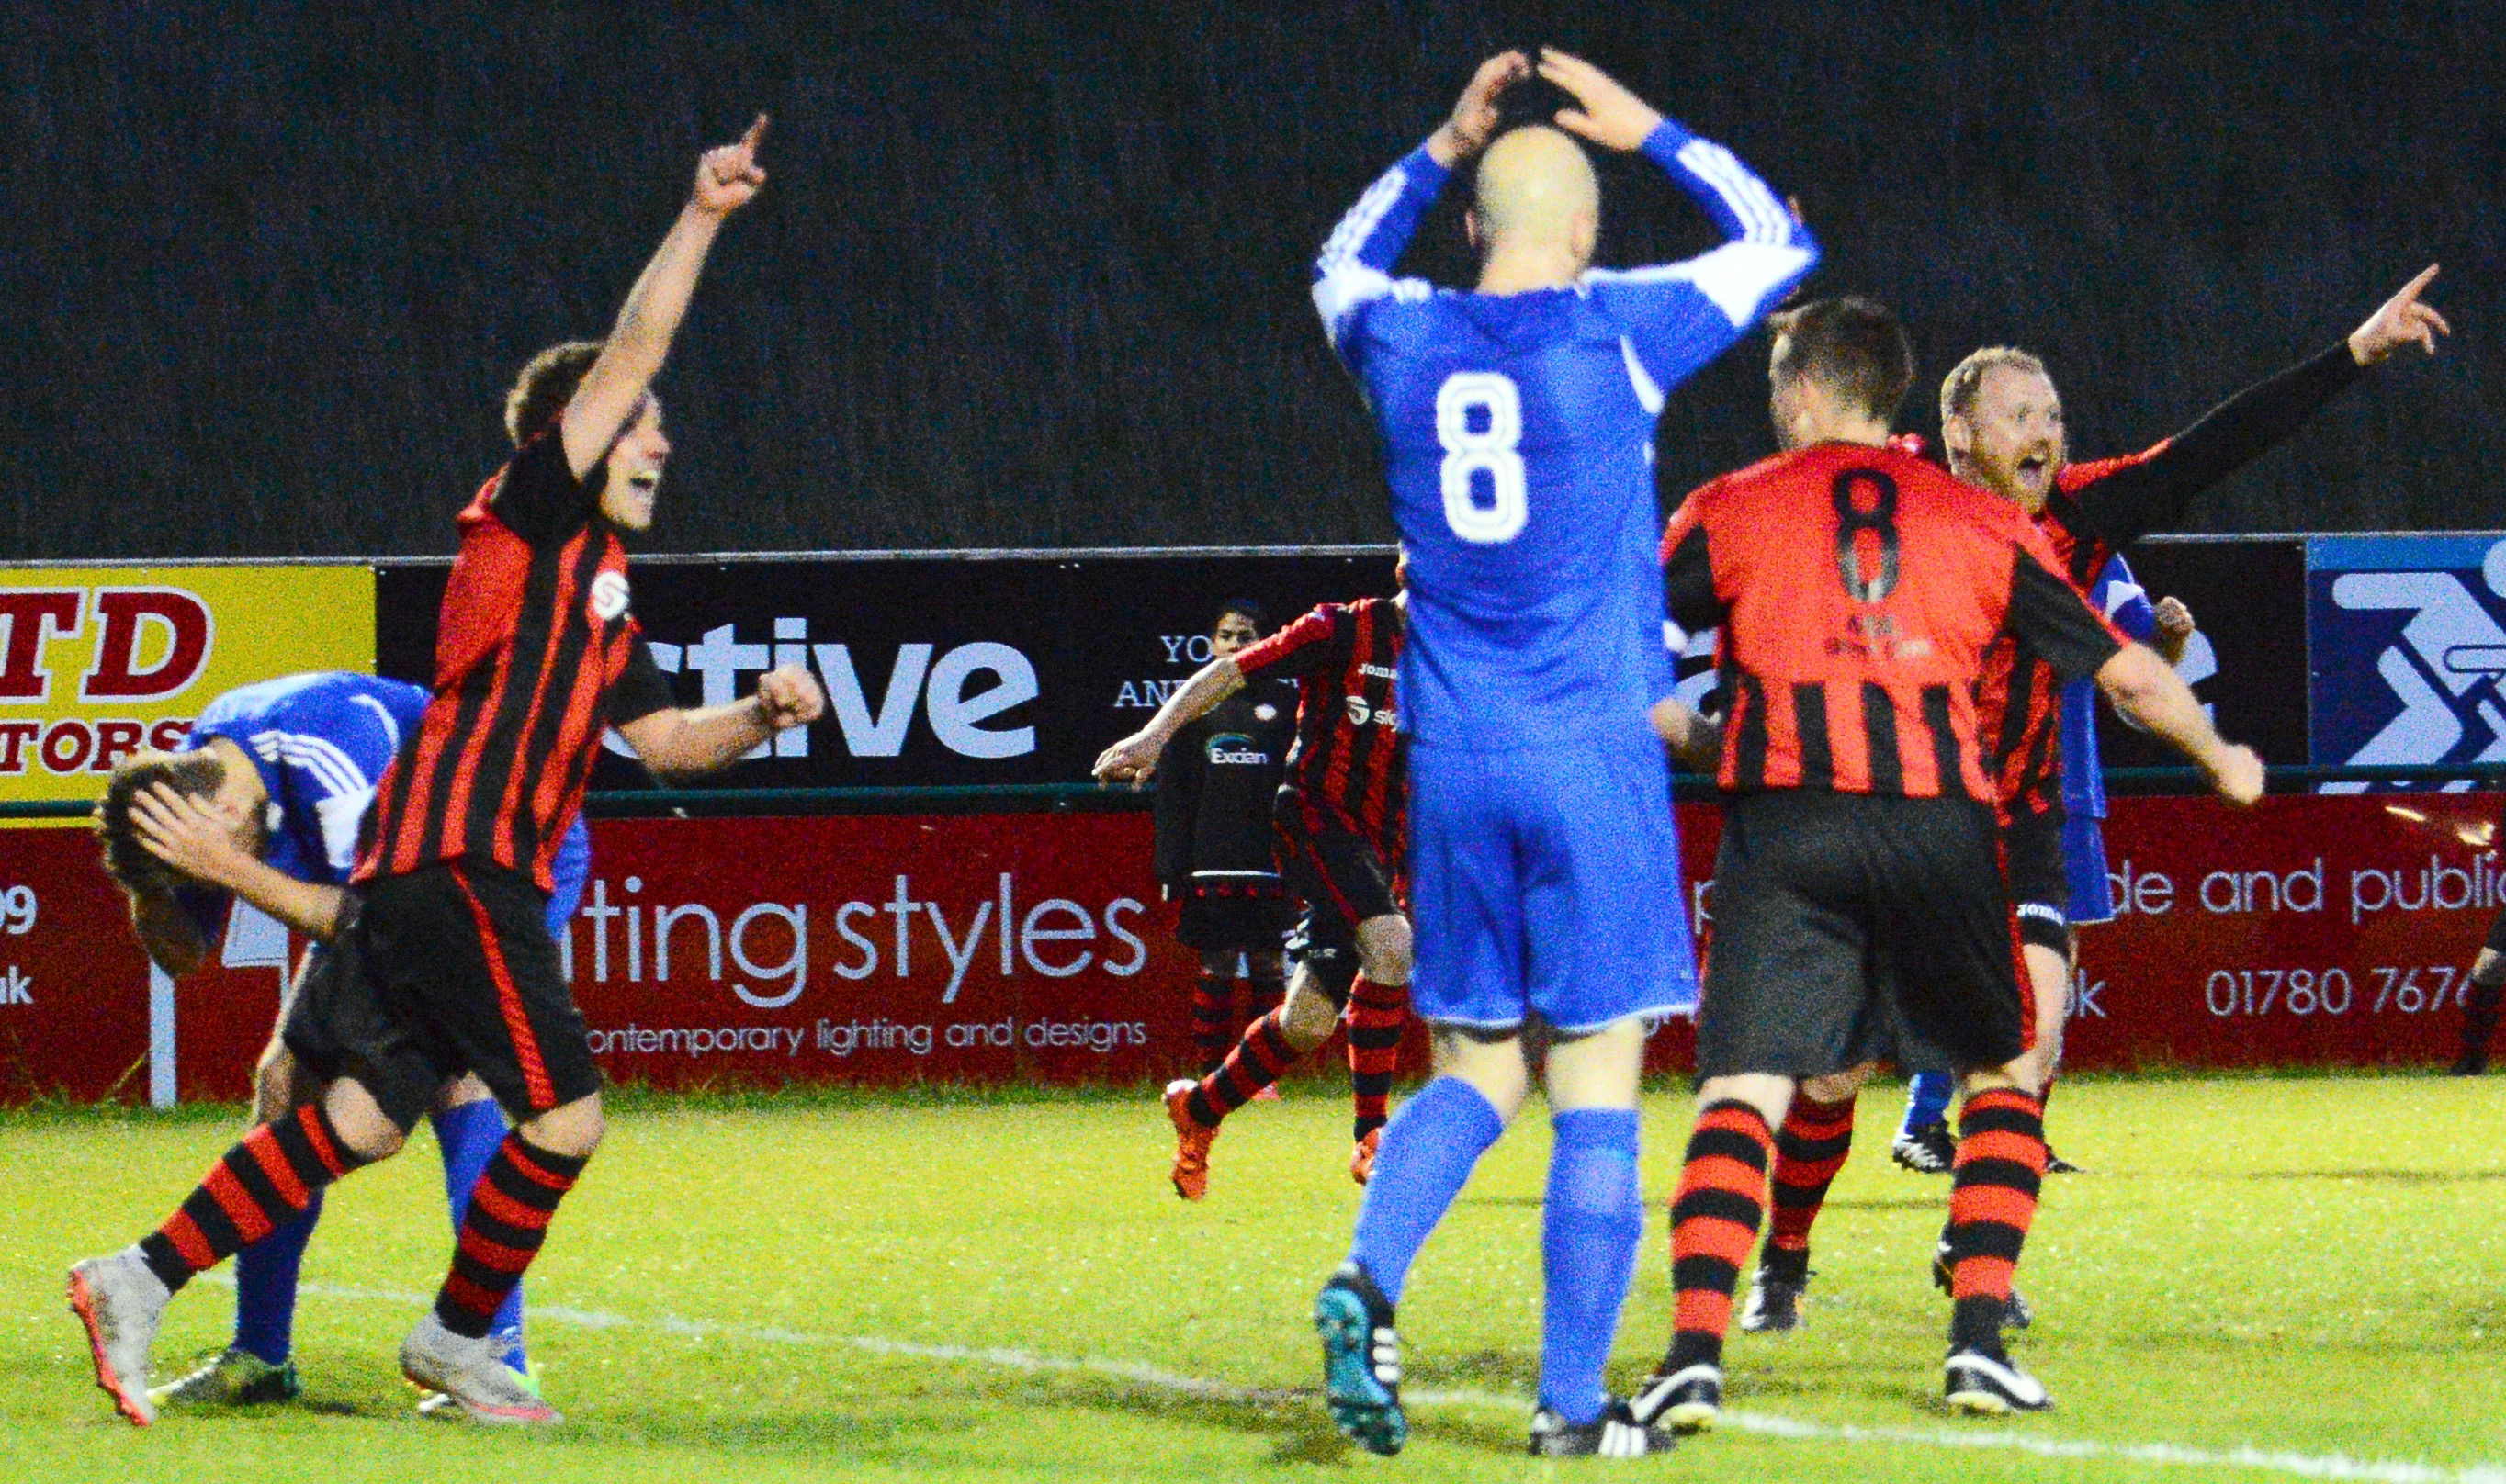 WINNER: Pinchbeck netted late on. Photo by STEVE RELF